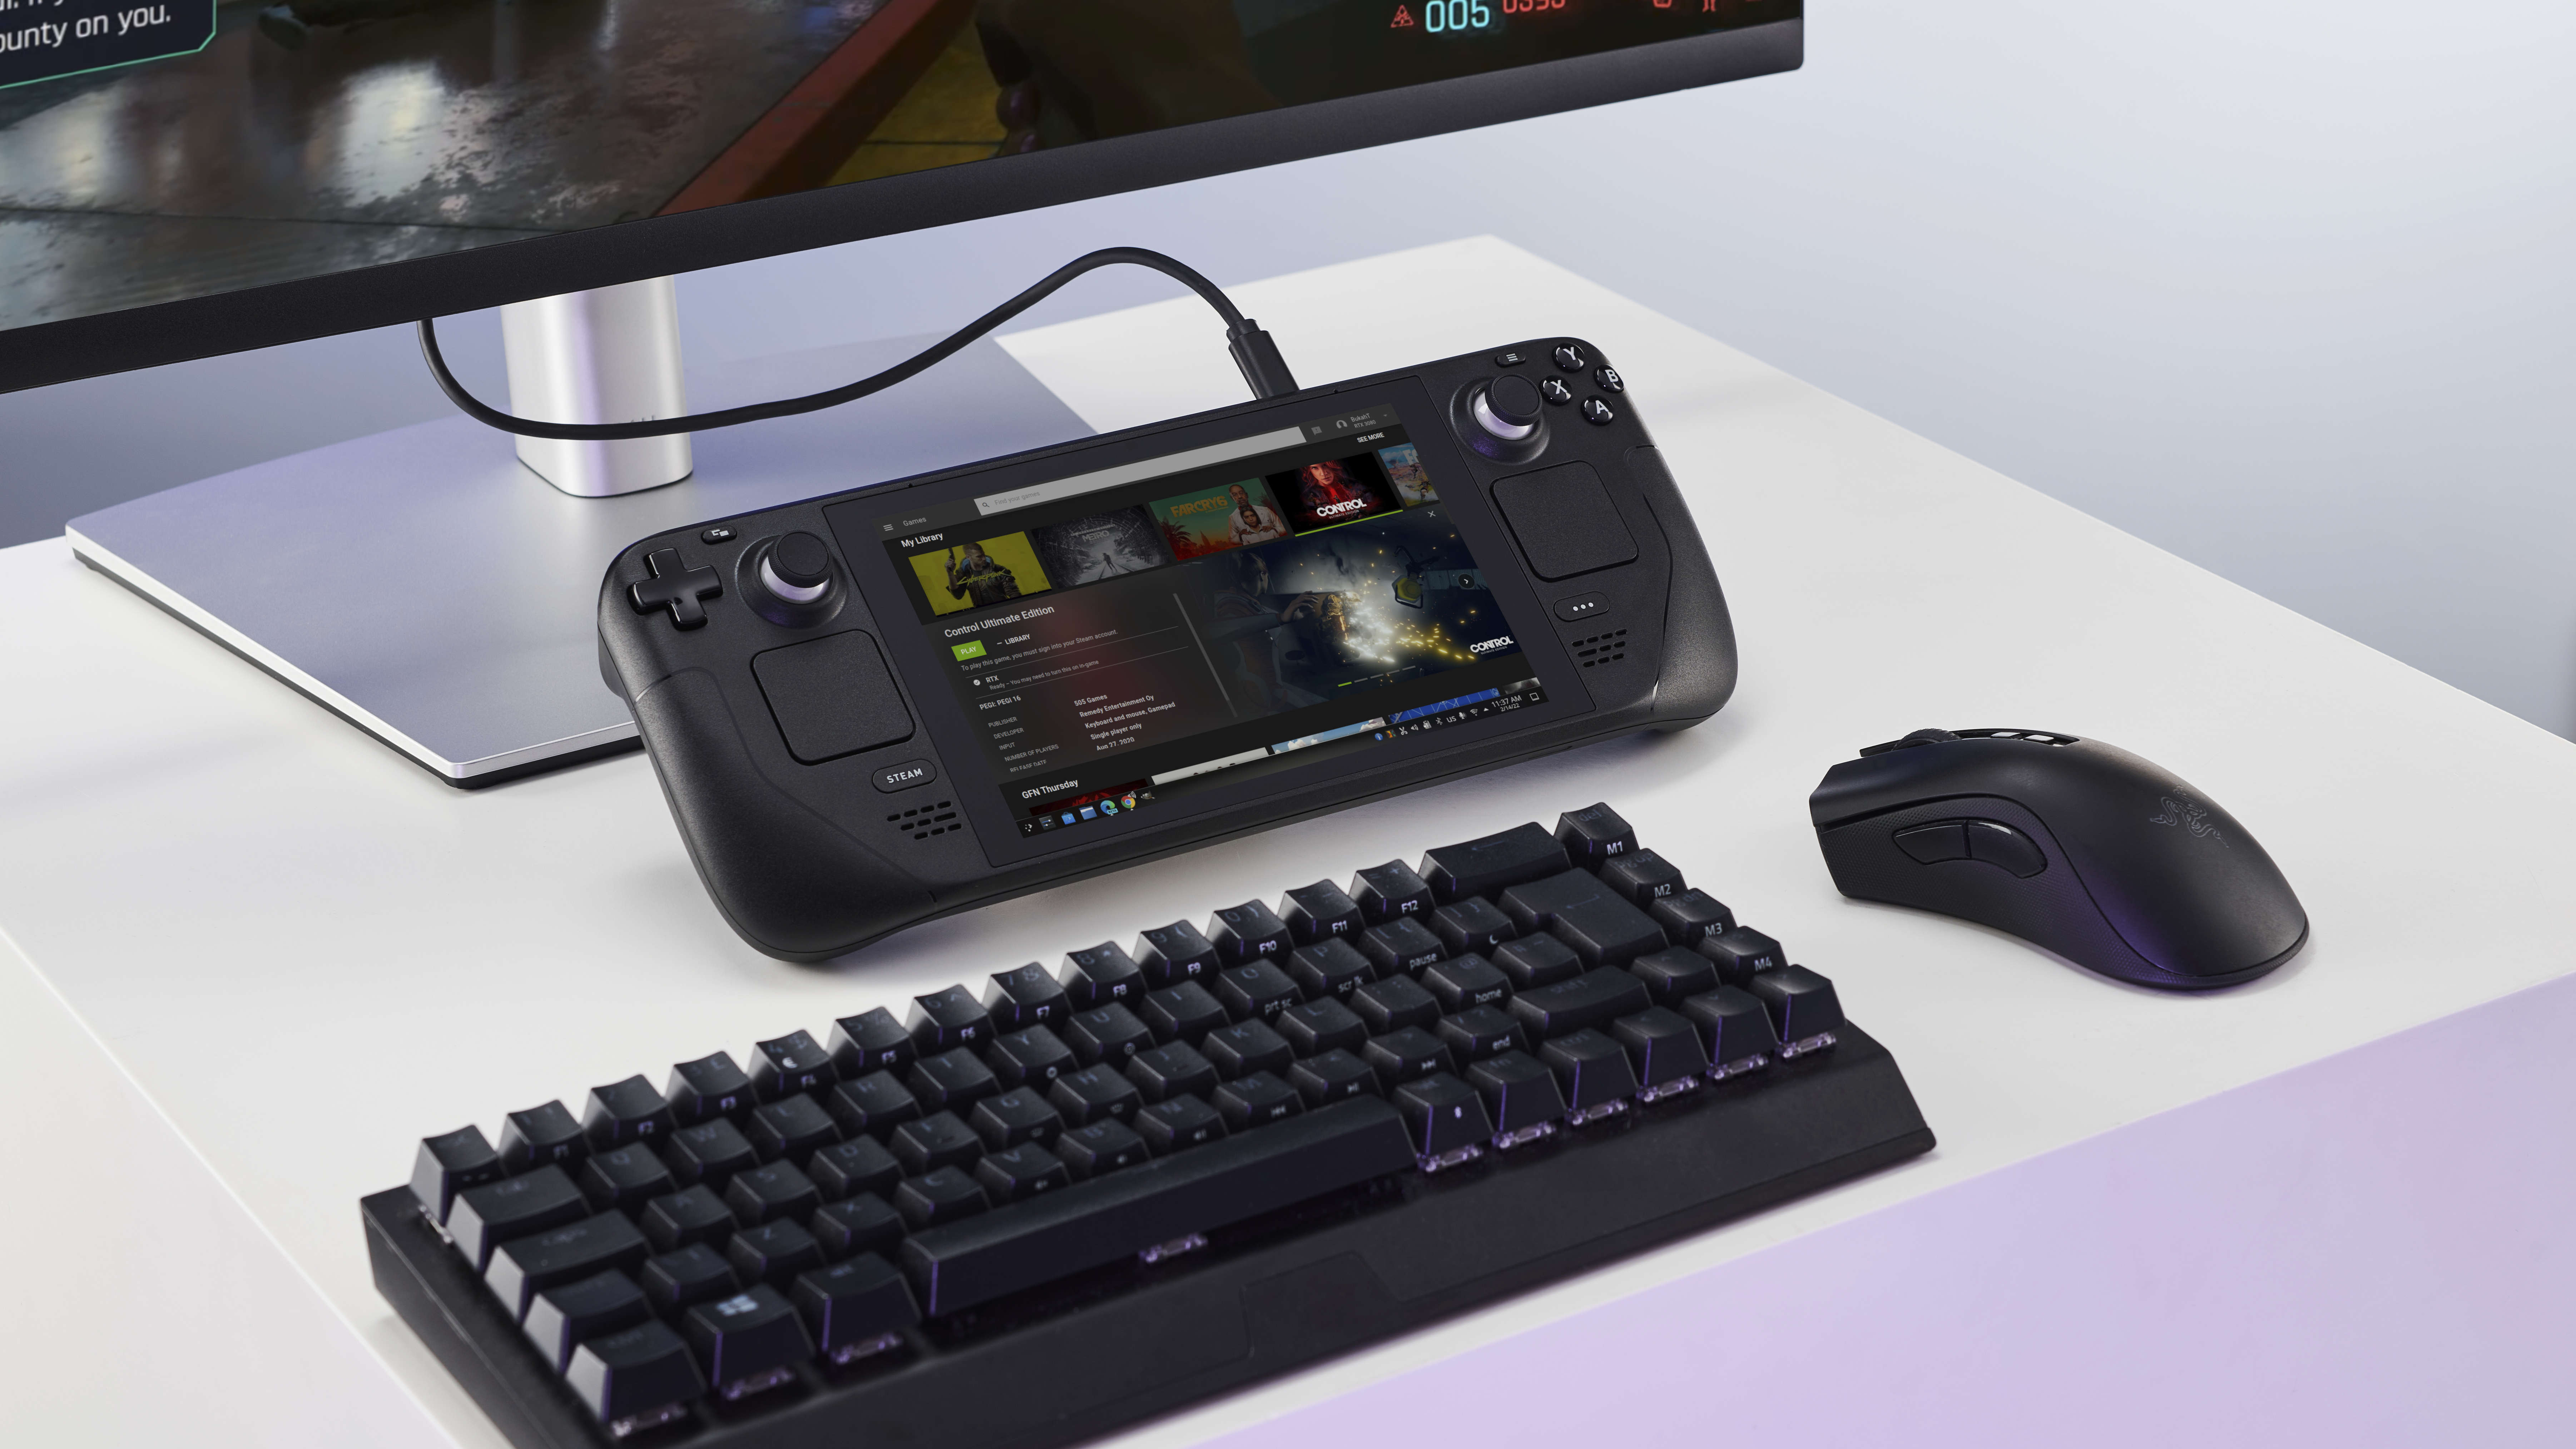 PC Gaming On Your TV? How to Turn Your Gamepad Into a Computer Mouse